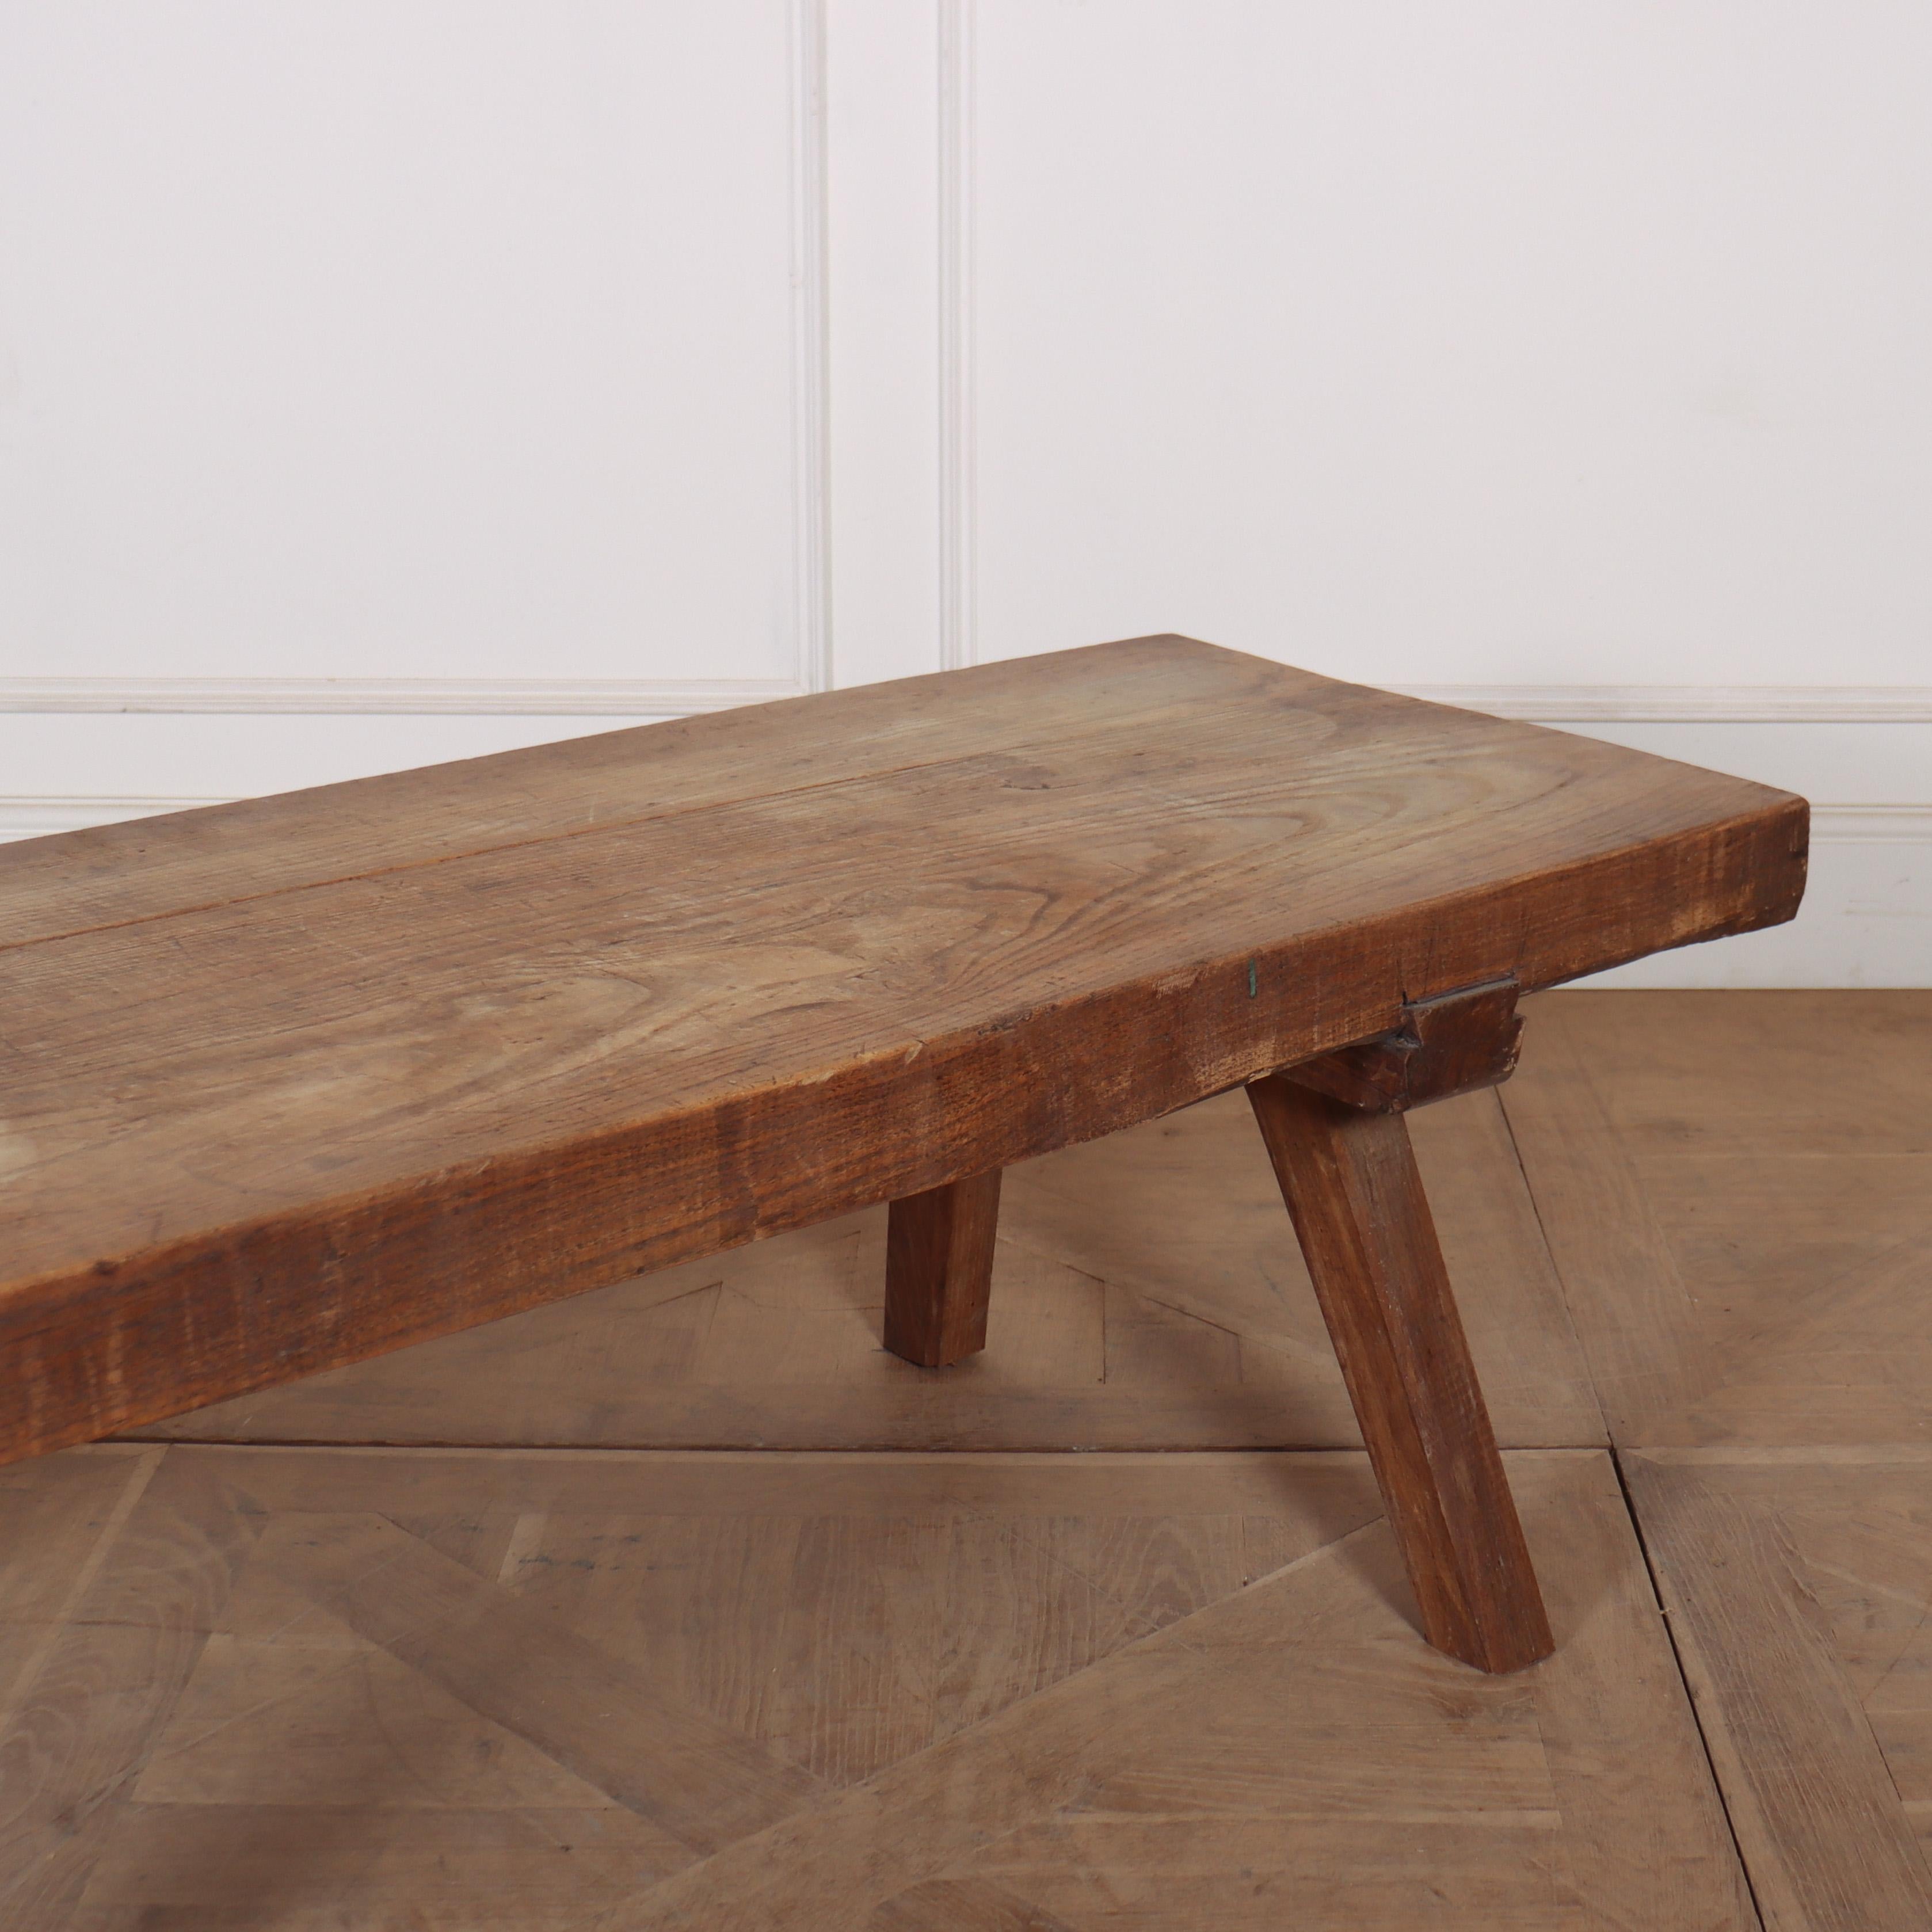 French primitive oak low table / coffee table. 1890.

Reference: 8032

Dimensions
60.5 inches (154 cms) Wide
22 inches (56 cms) Deep
18 inches (46 cms) High